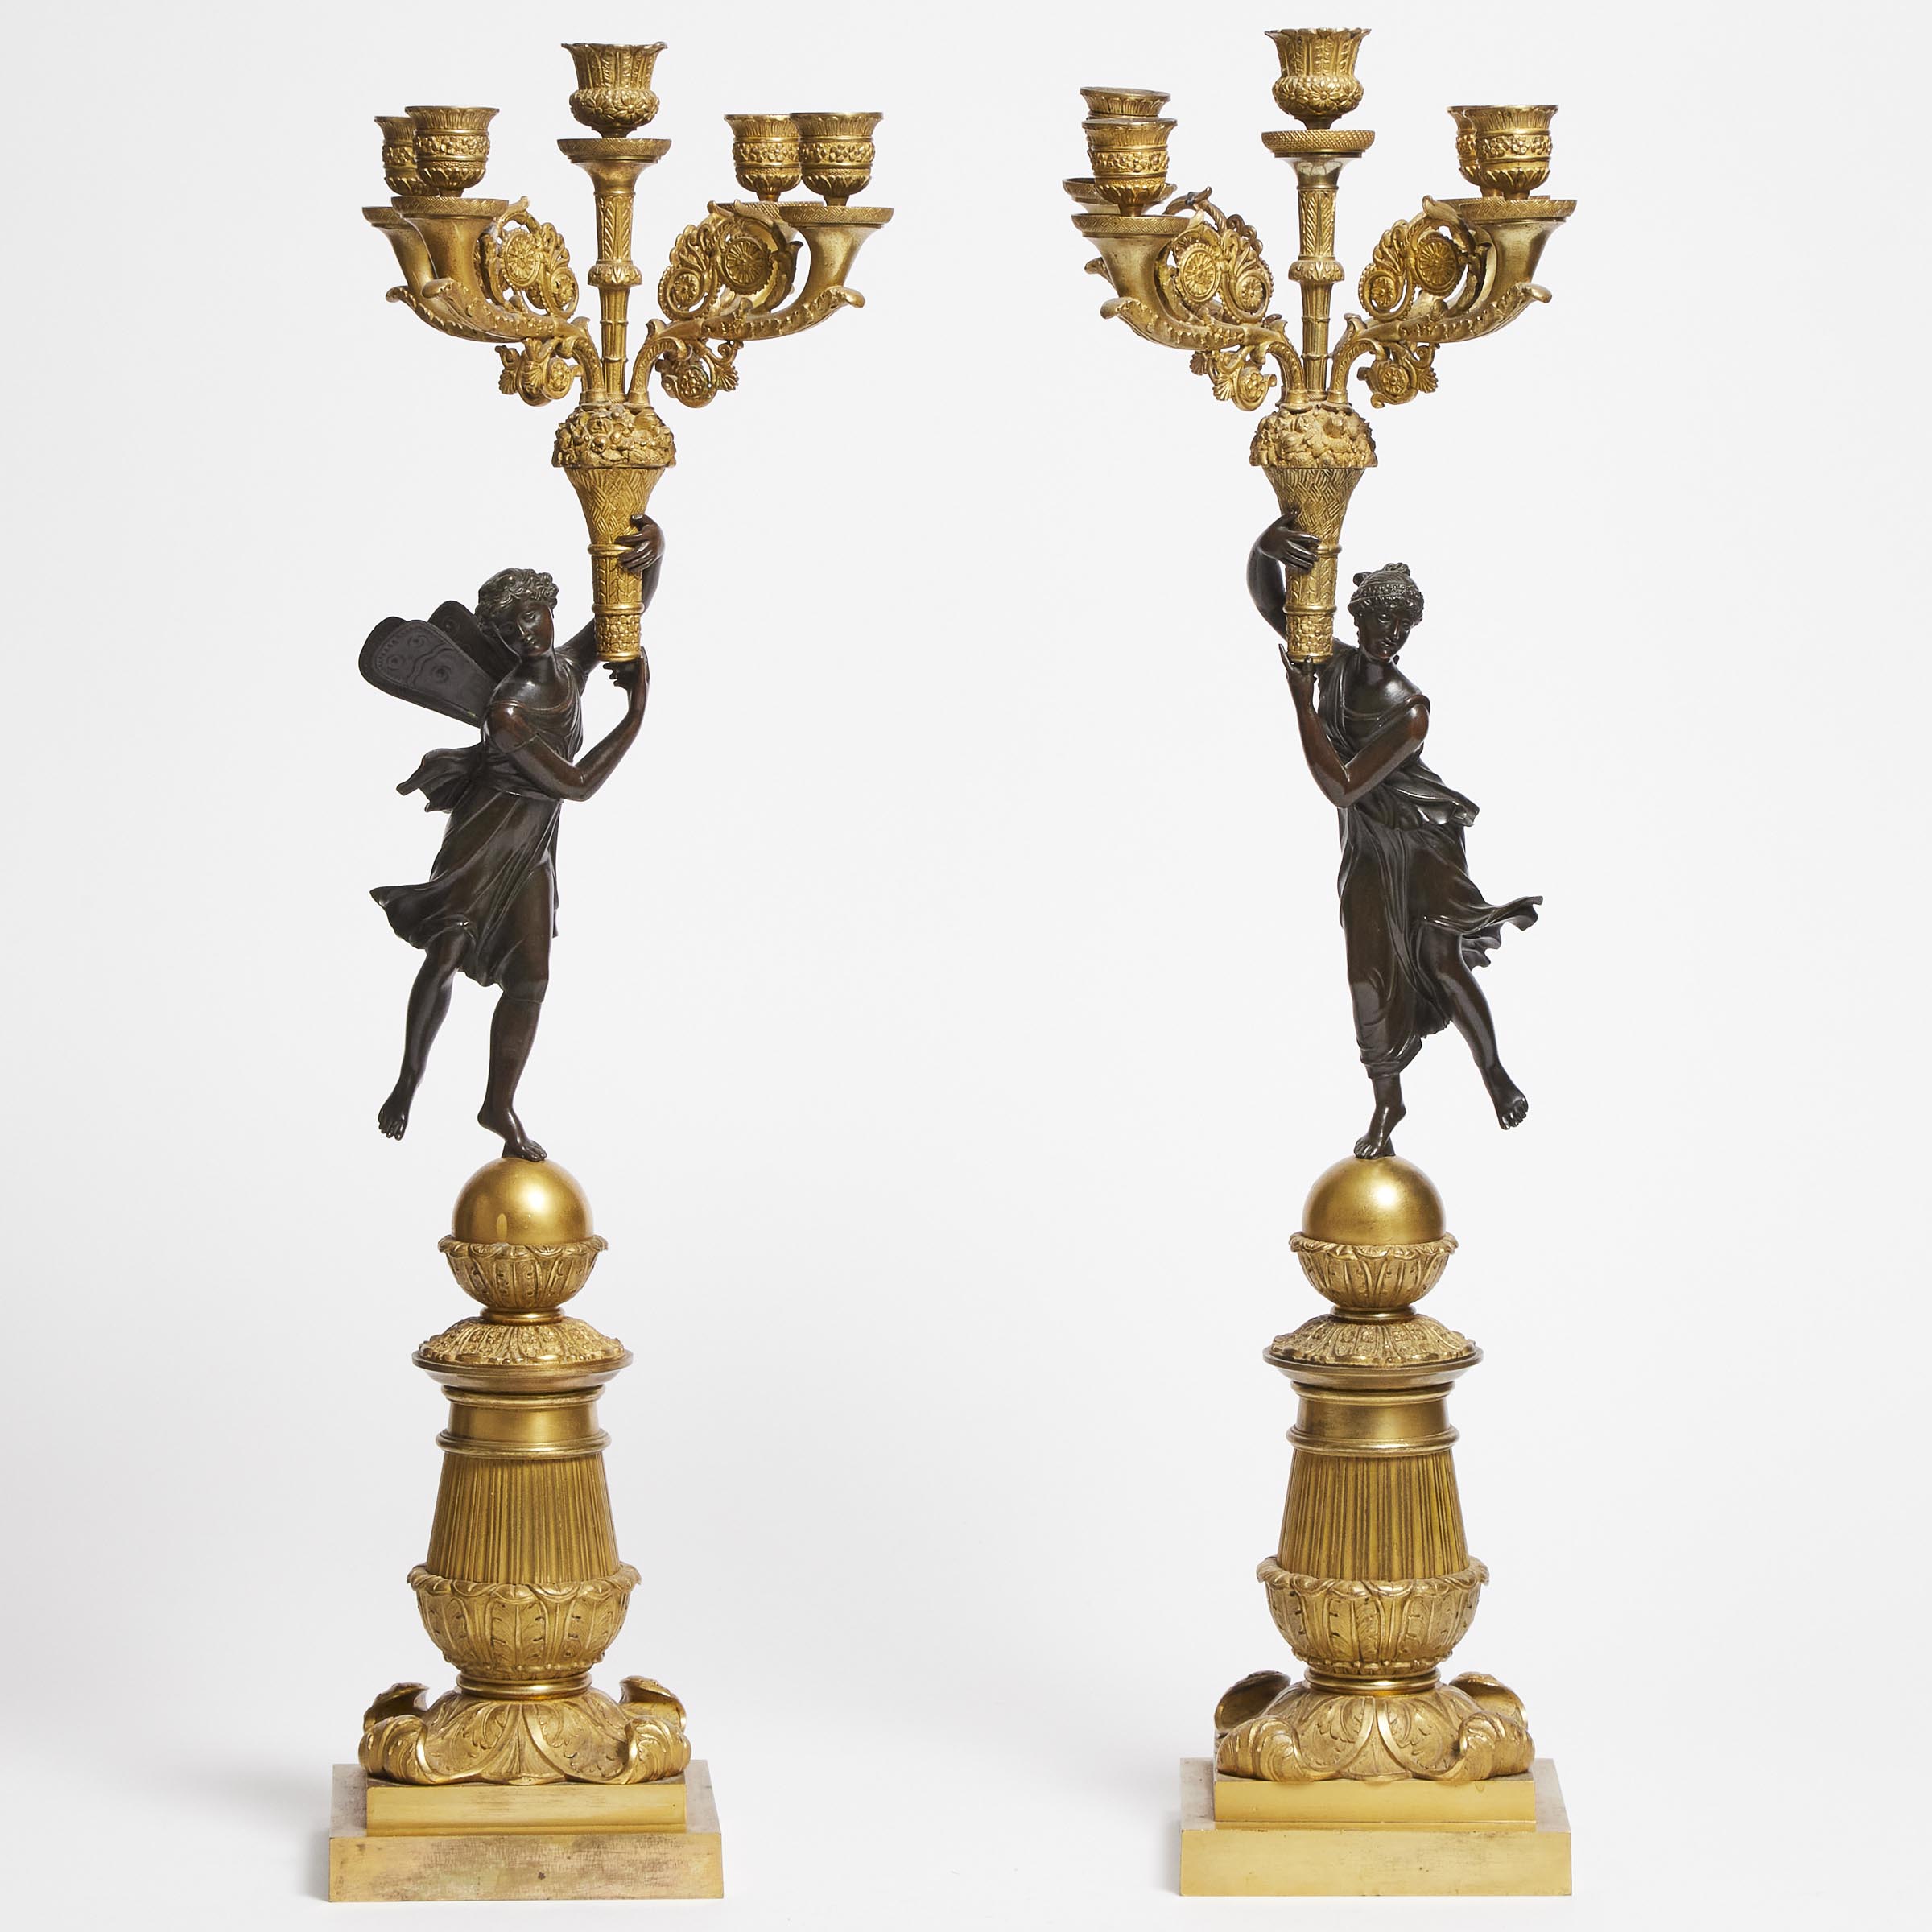 Pair of French Empire Style Gilt